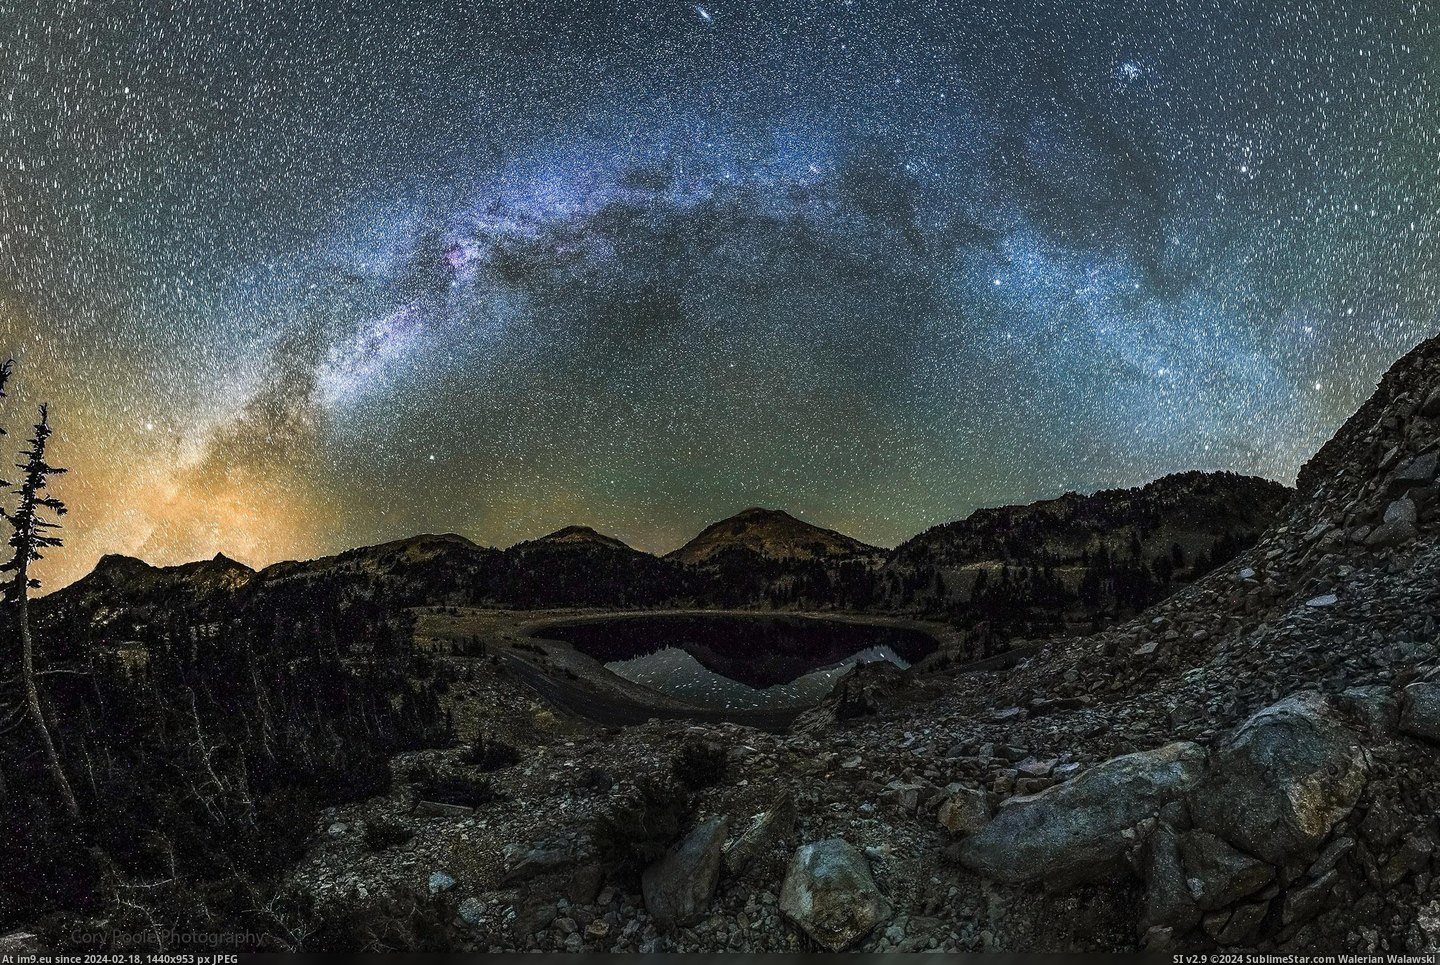 #Park #National #Lake #California #Volcanic #Lassen #Helen #Way #Northern #Arches #Milky [Earthporn] The Milky Way arches over Mt. Lassen and Lake Helen in Lassen Volcanic National Park in Northern California. [2500x1 Pic. (Изображение из альбом My r/EARTHPORN favs))